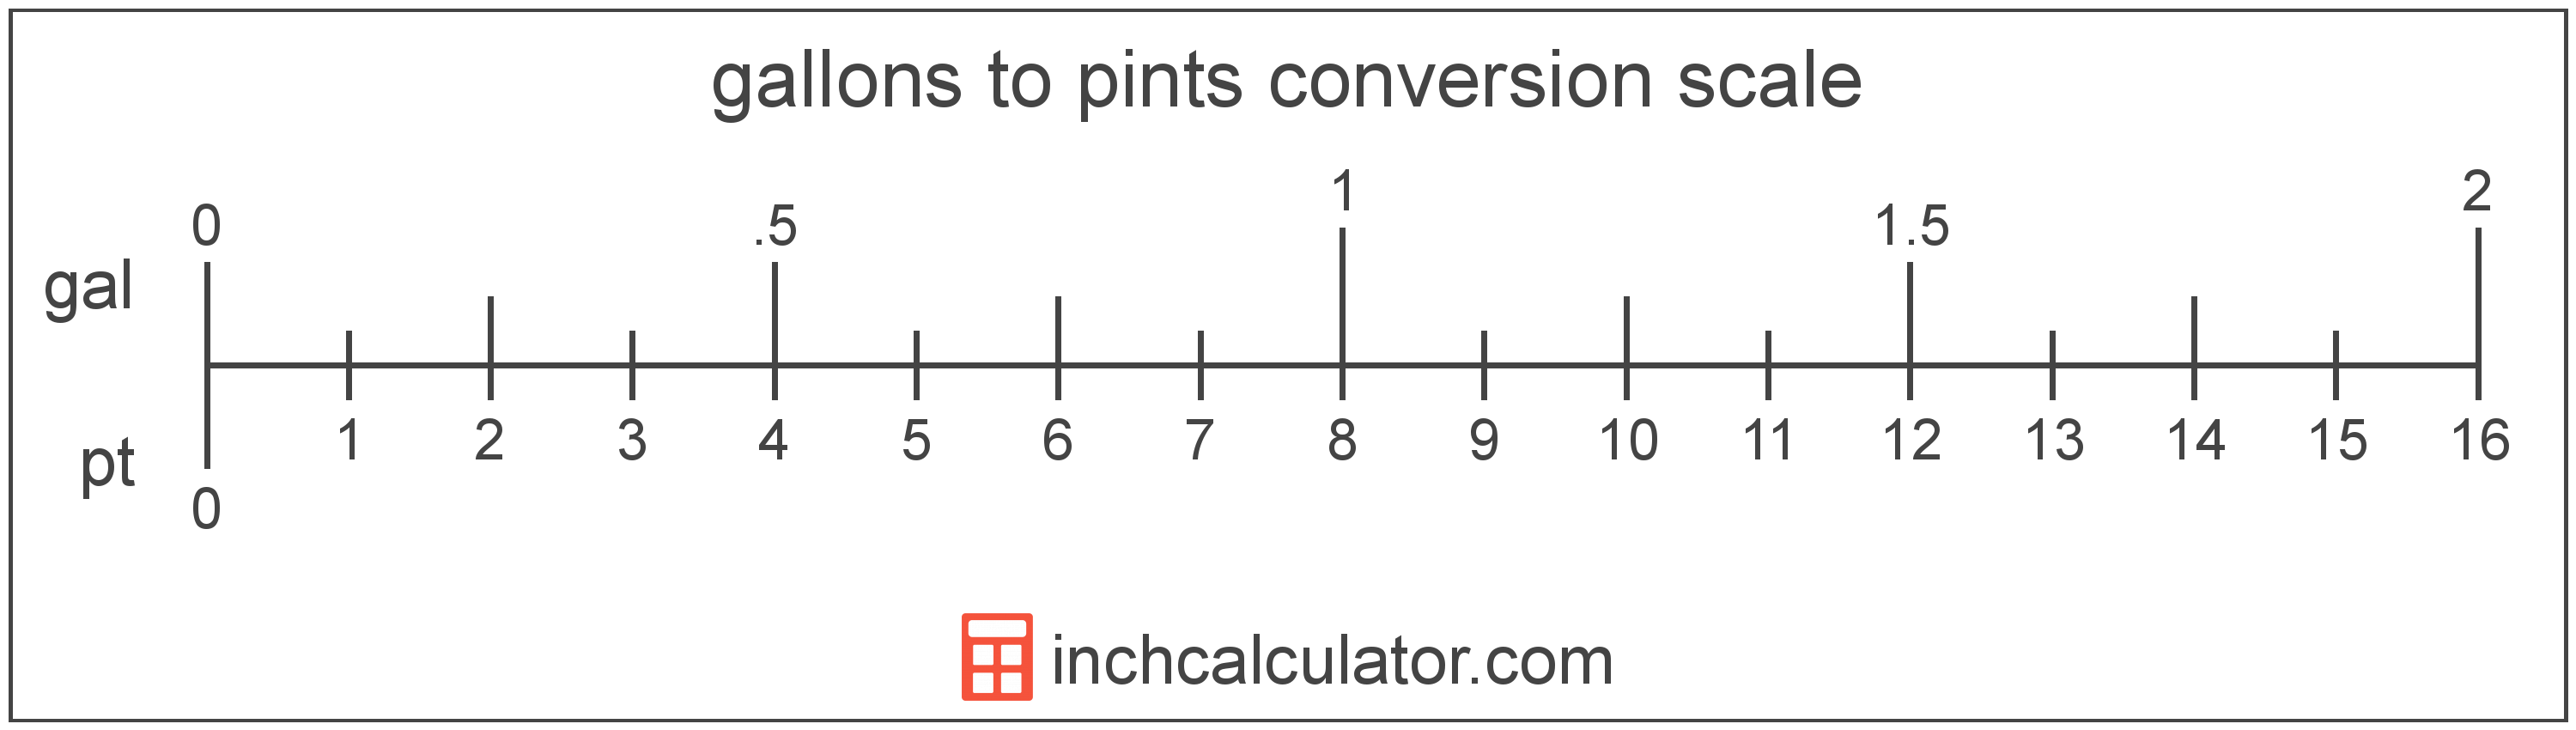 conversion scale showing pints and equivalent gallons volume values